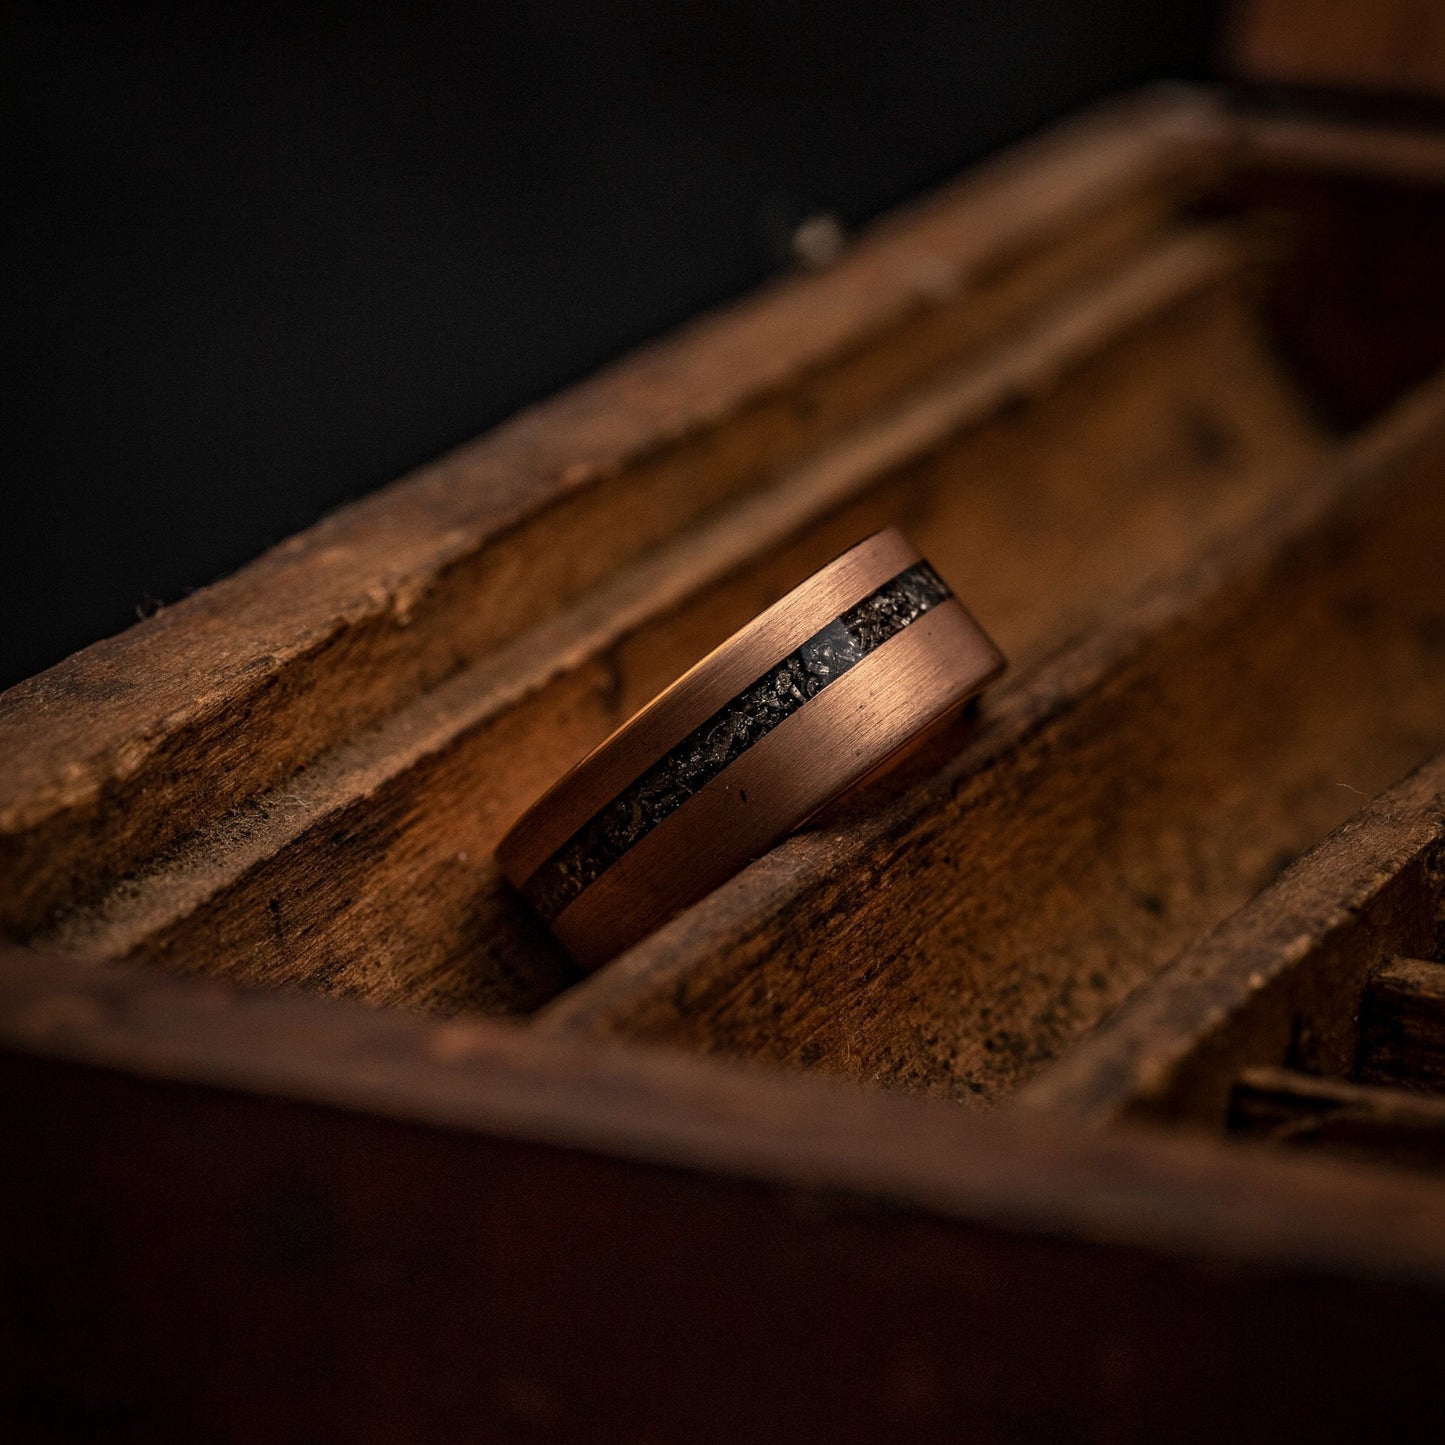 Unique his and hers wedding rings with genuine meteorite and rose gold accents.